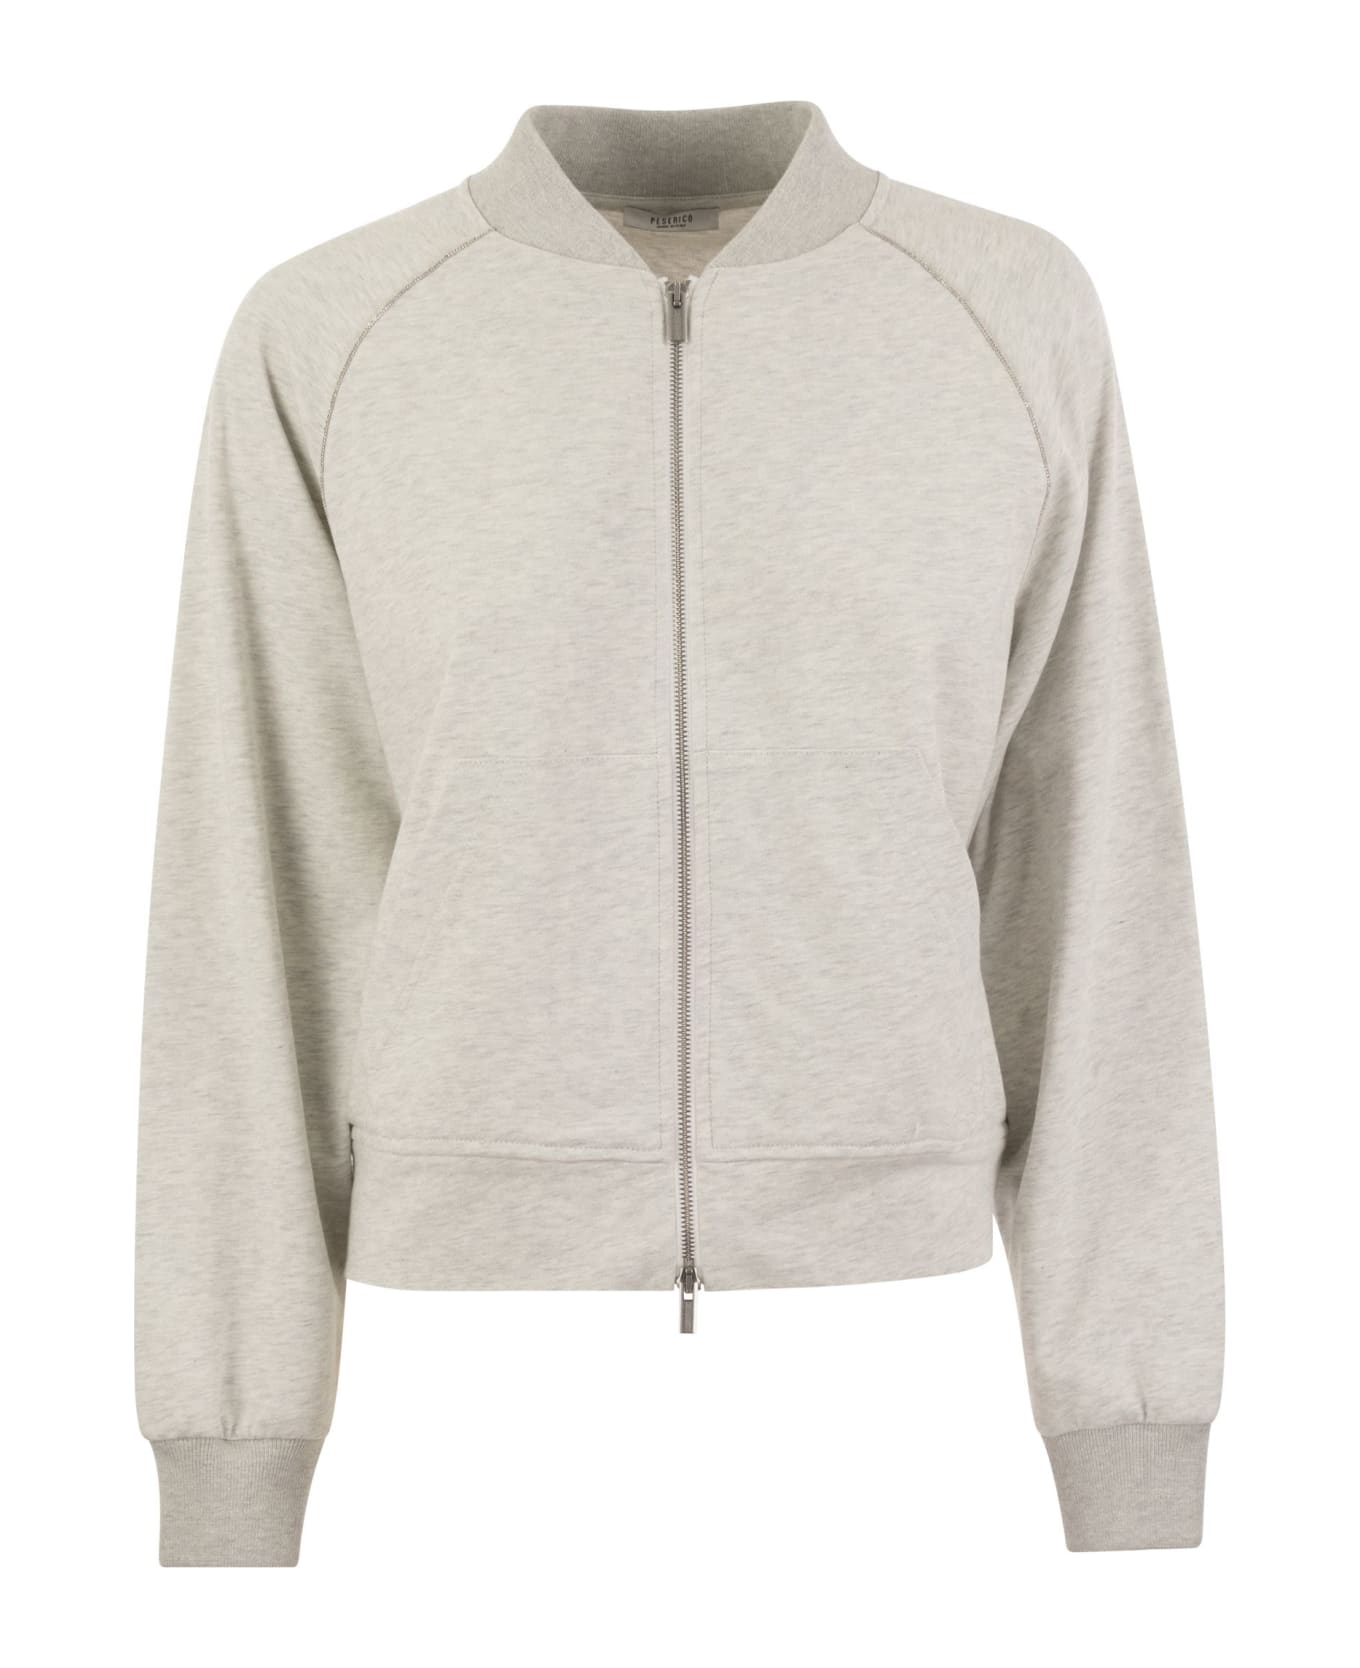 Peserico Sweatshirt In Cotton Mélange And Tricot Details - Grey